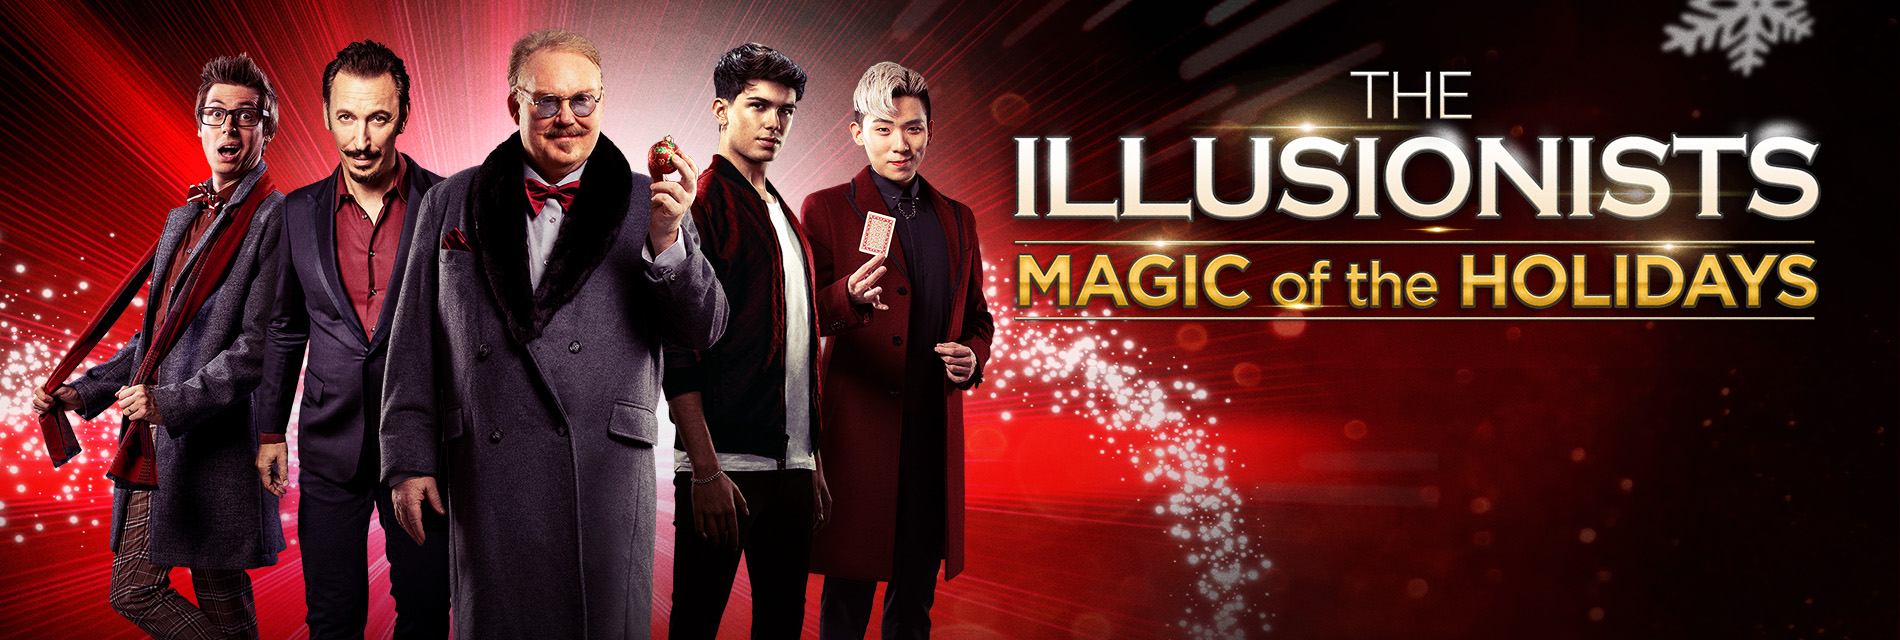 Slide 4: The Illusionists - Magic of the Holidays